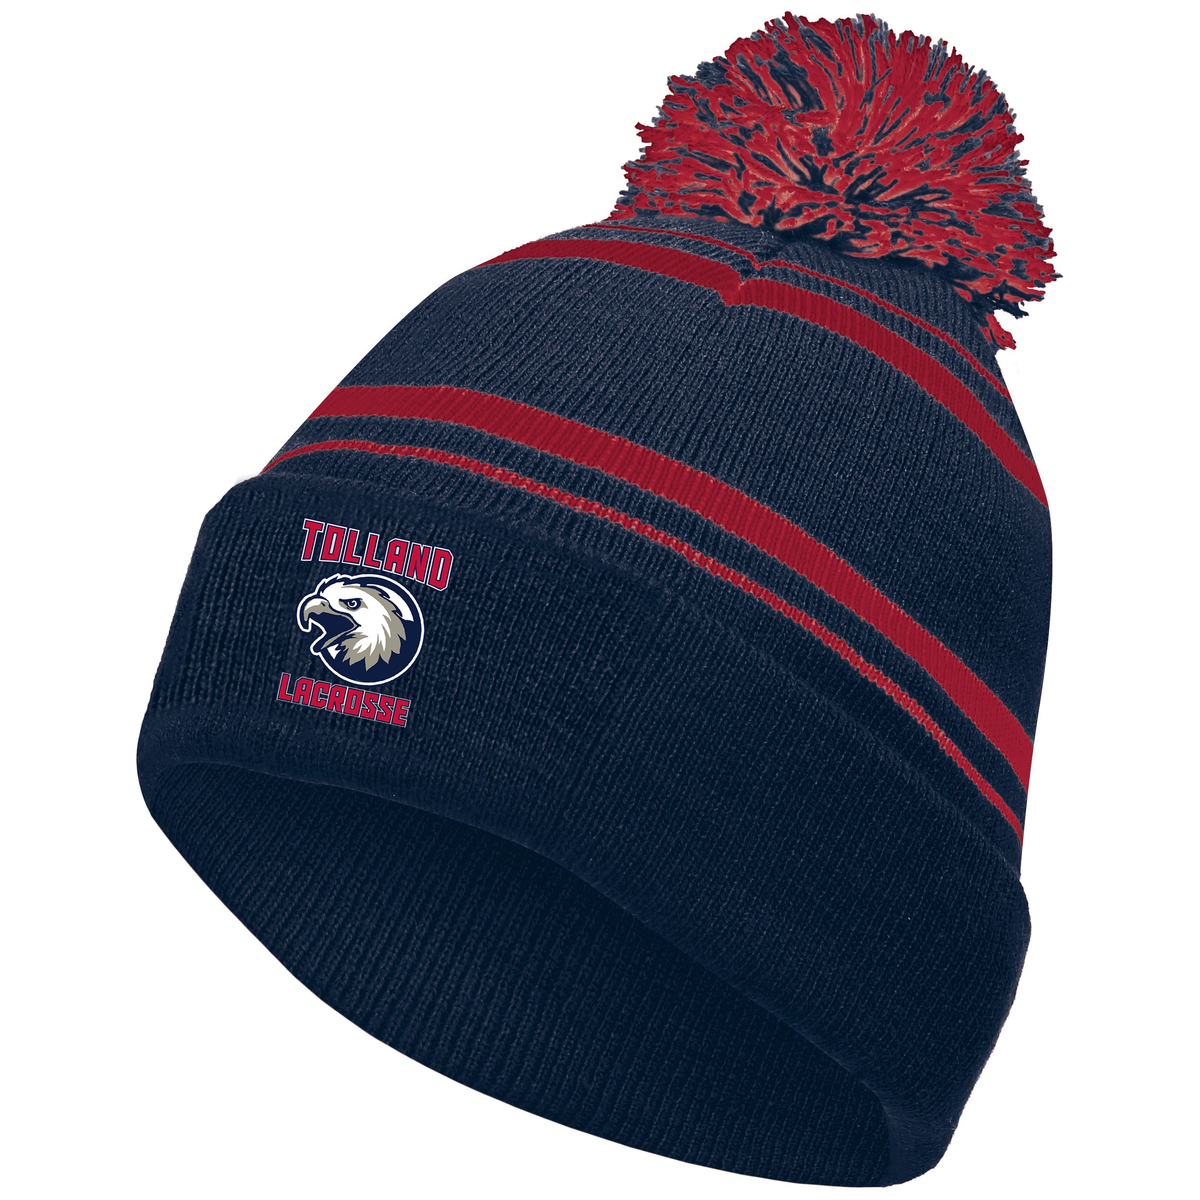 Tolland Lacrosse Club Homecoming Beanie